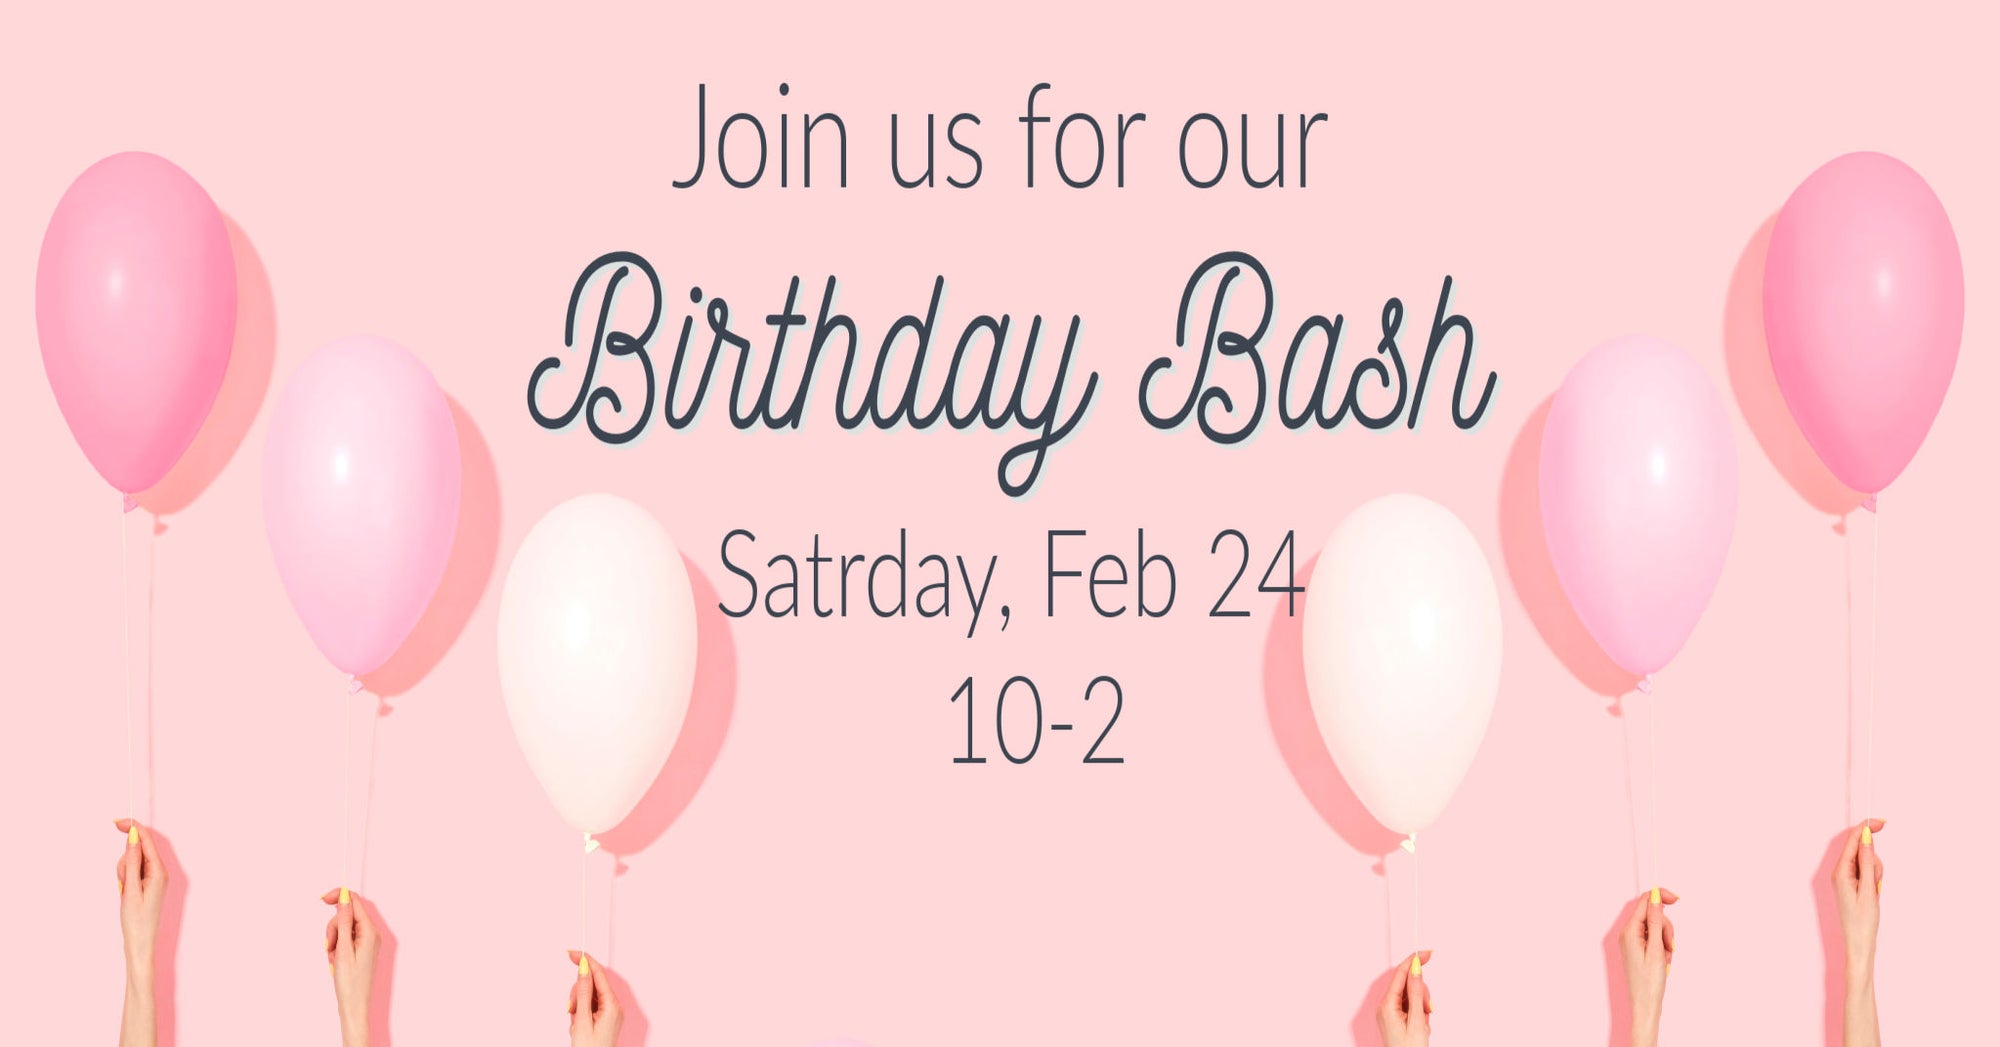 Join us February 24th in the shop as we celebrate our 10th birthday!